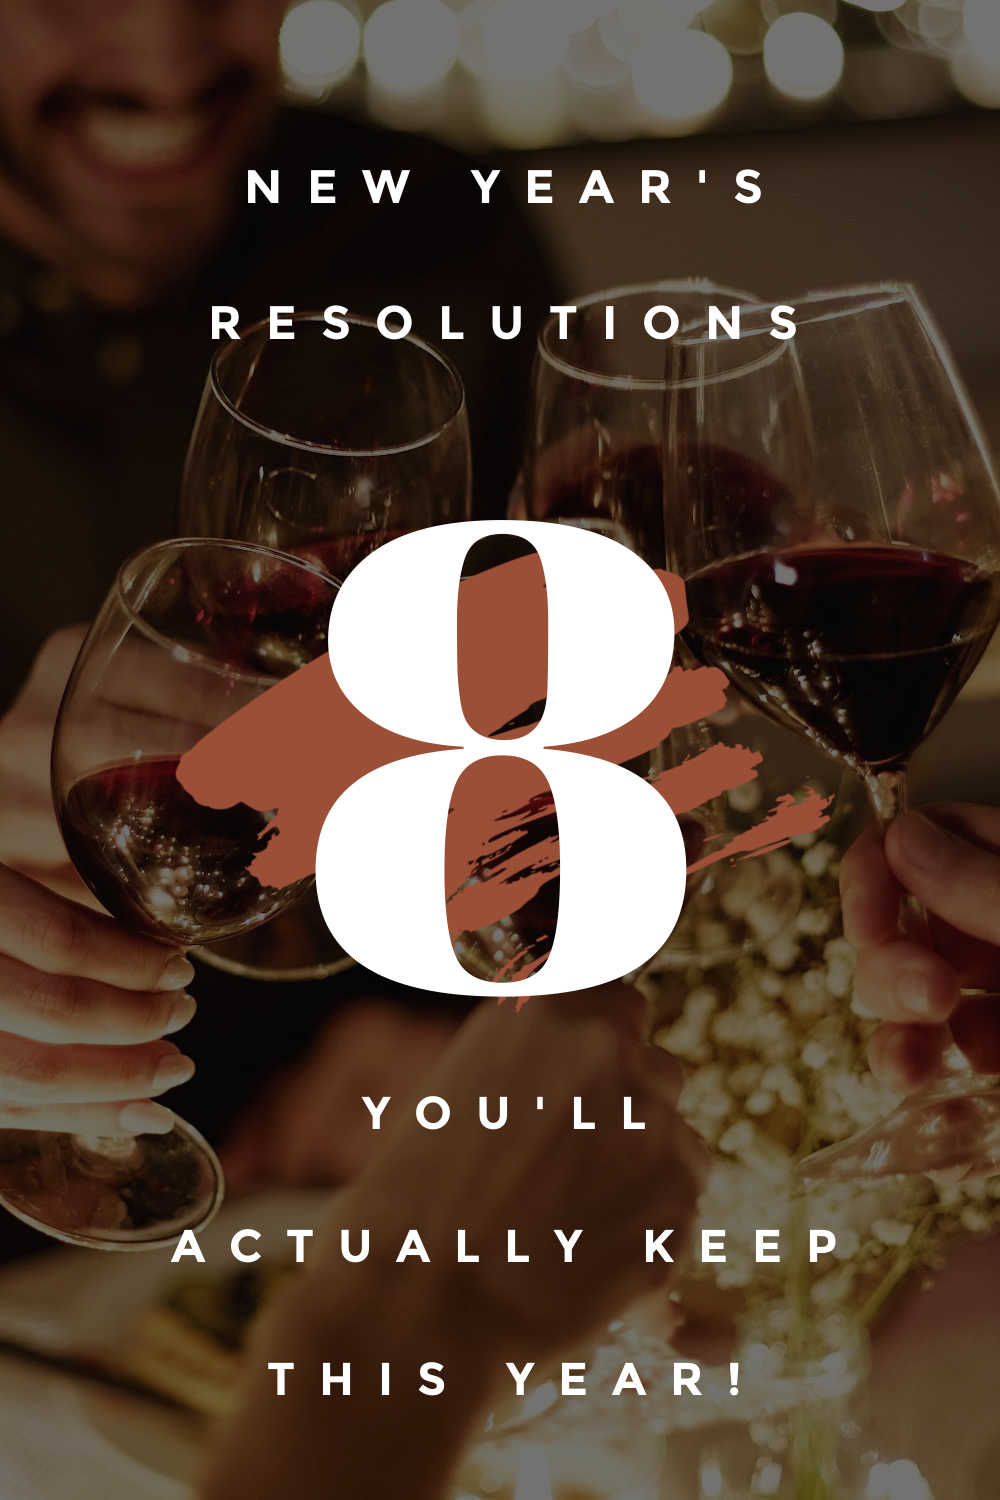 8 NEW YEARS RESOLUTIONS YOULL ACTUALLY KEEP